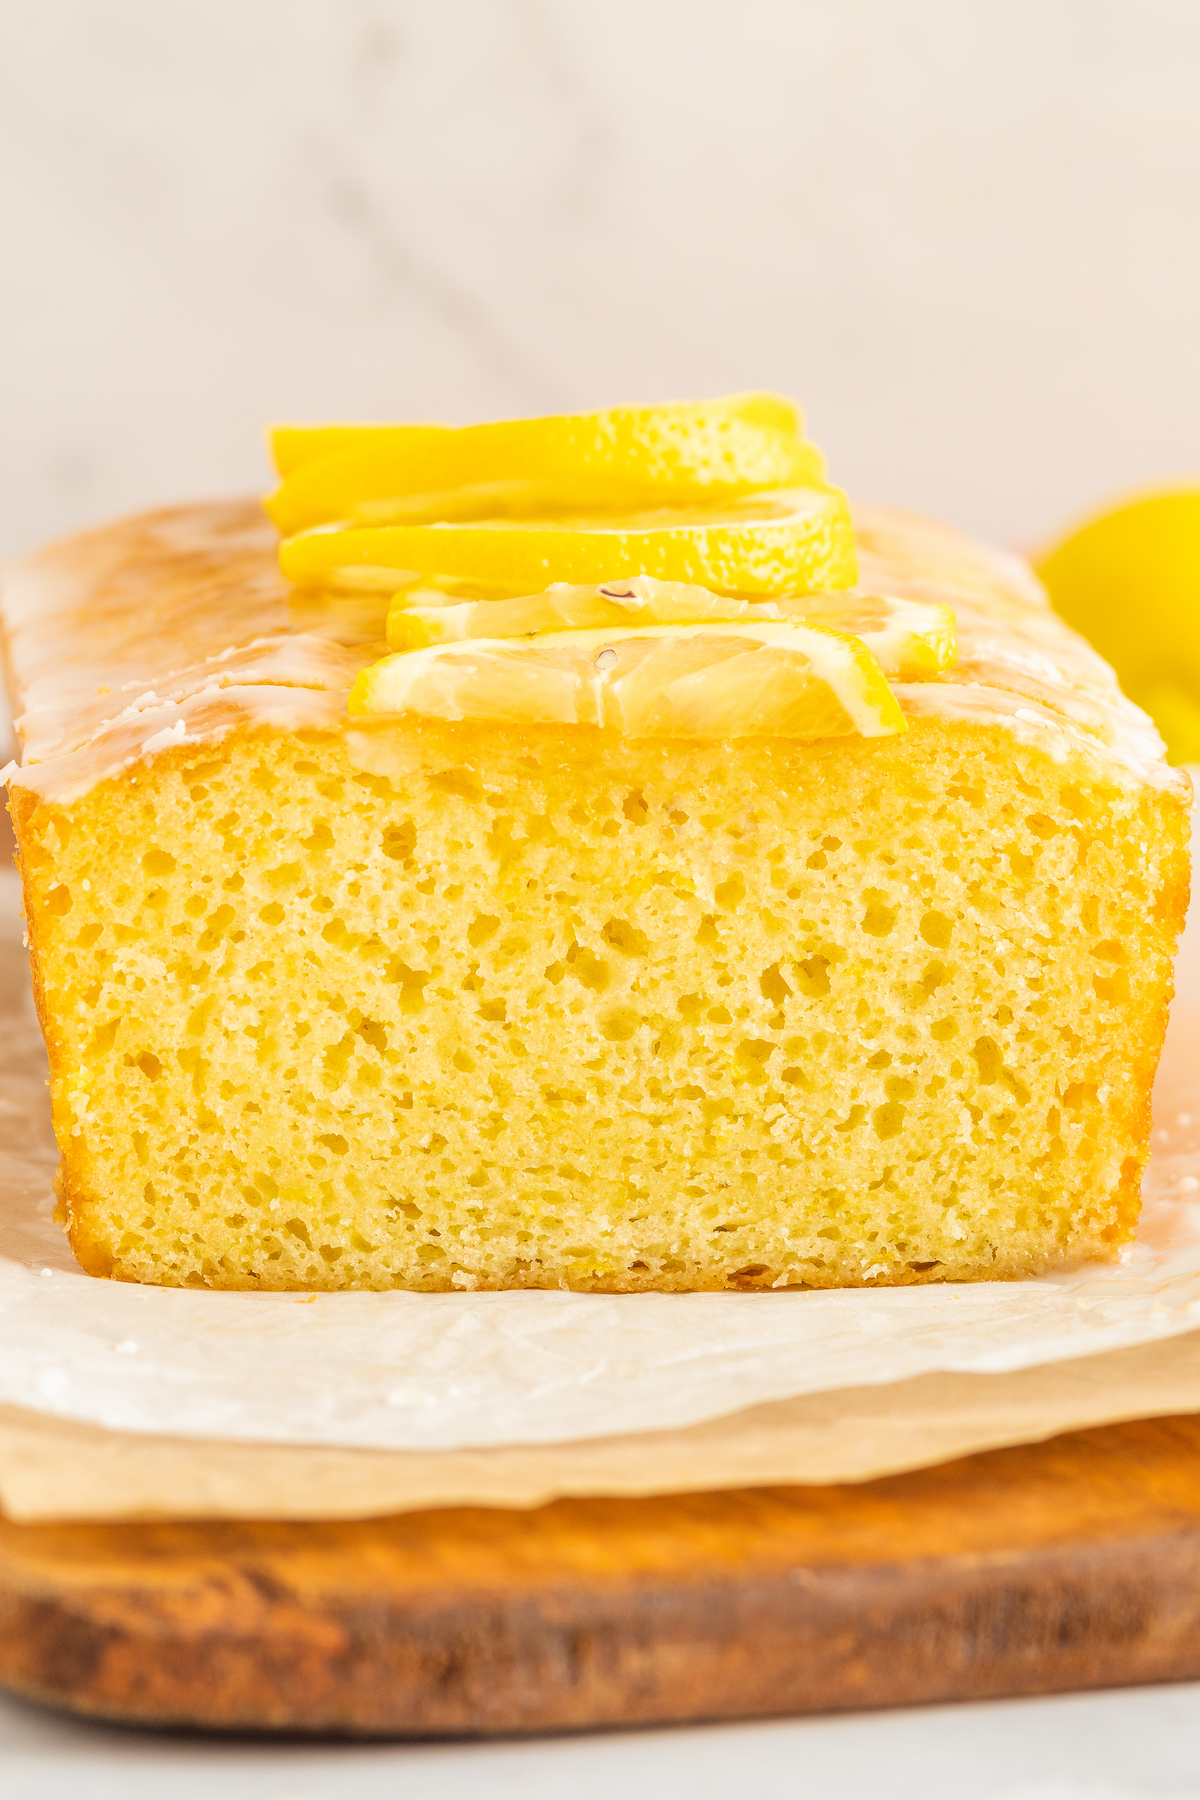 Side view of a cut lemon loaf cake, showing the interior texture of the crumb.